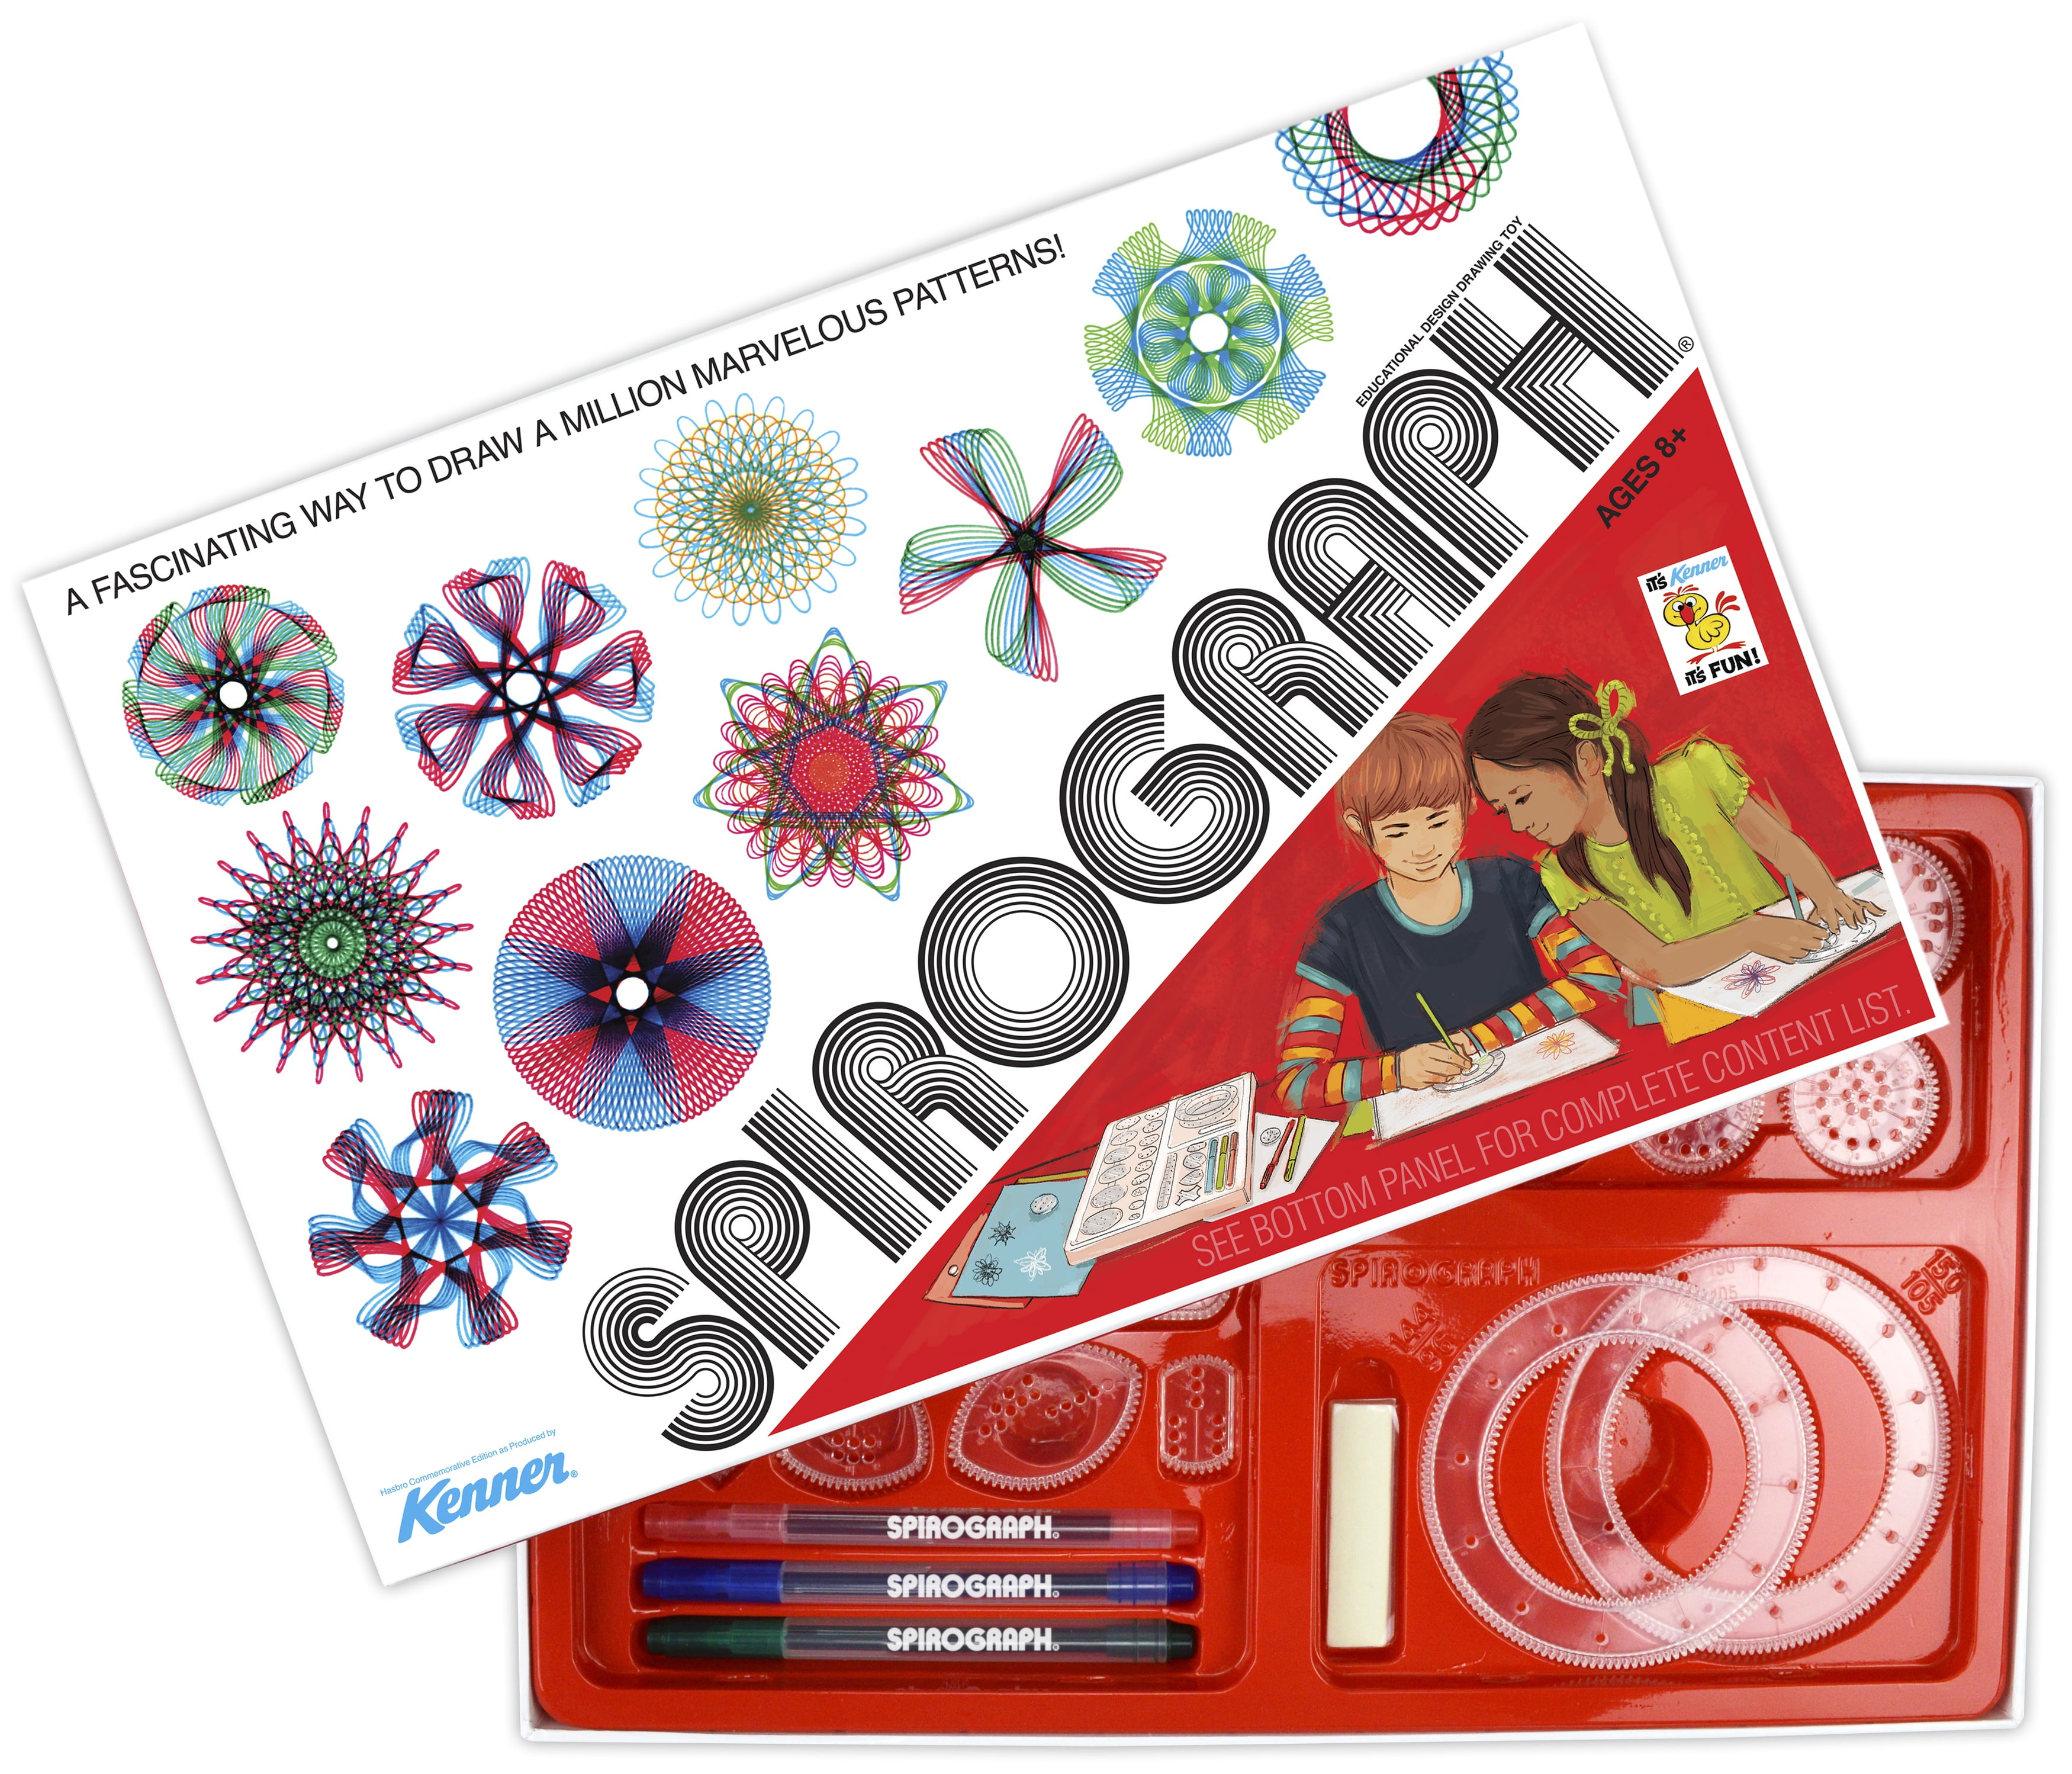 2013 Hasbro The Original Spirograph 30 PC Complete Drawing Set Ages 8 for sale online 